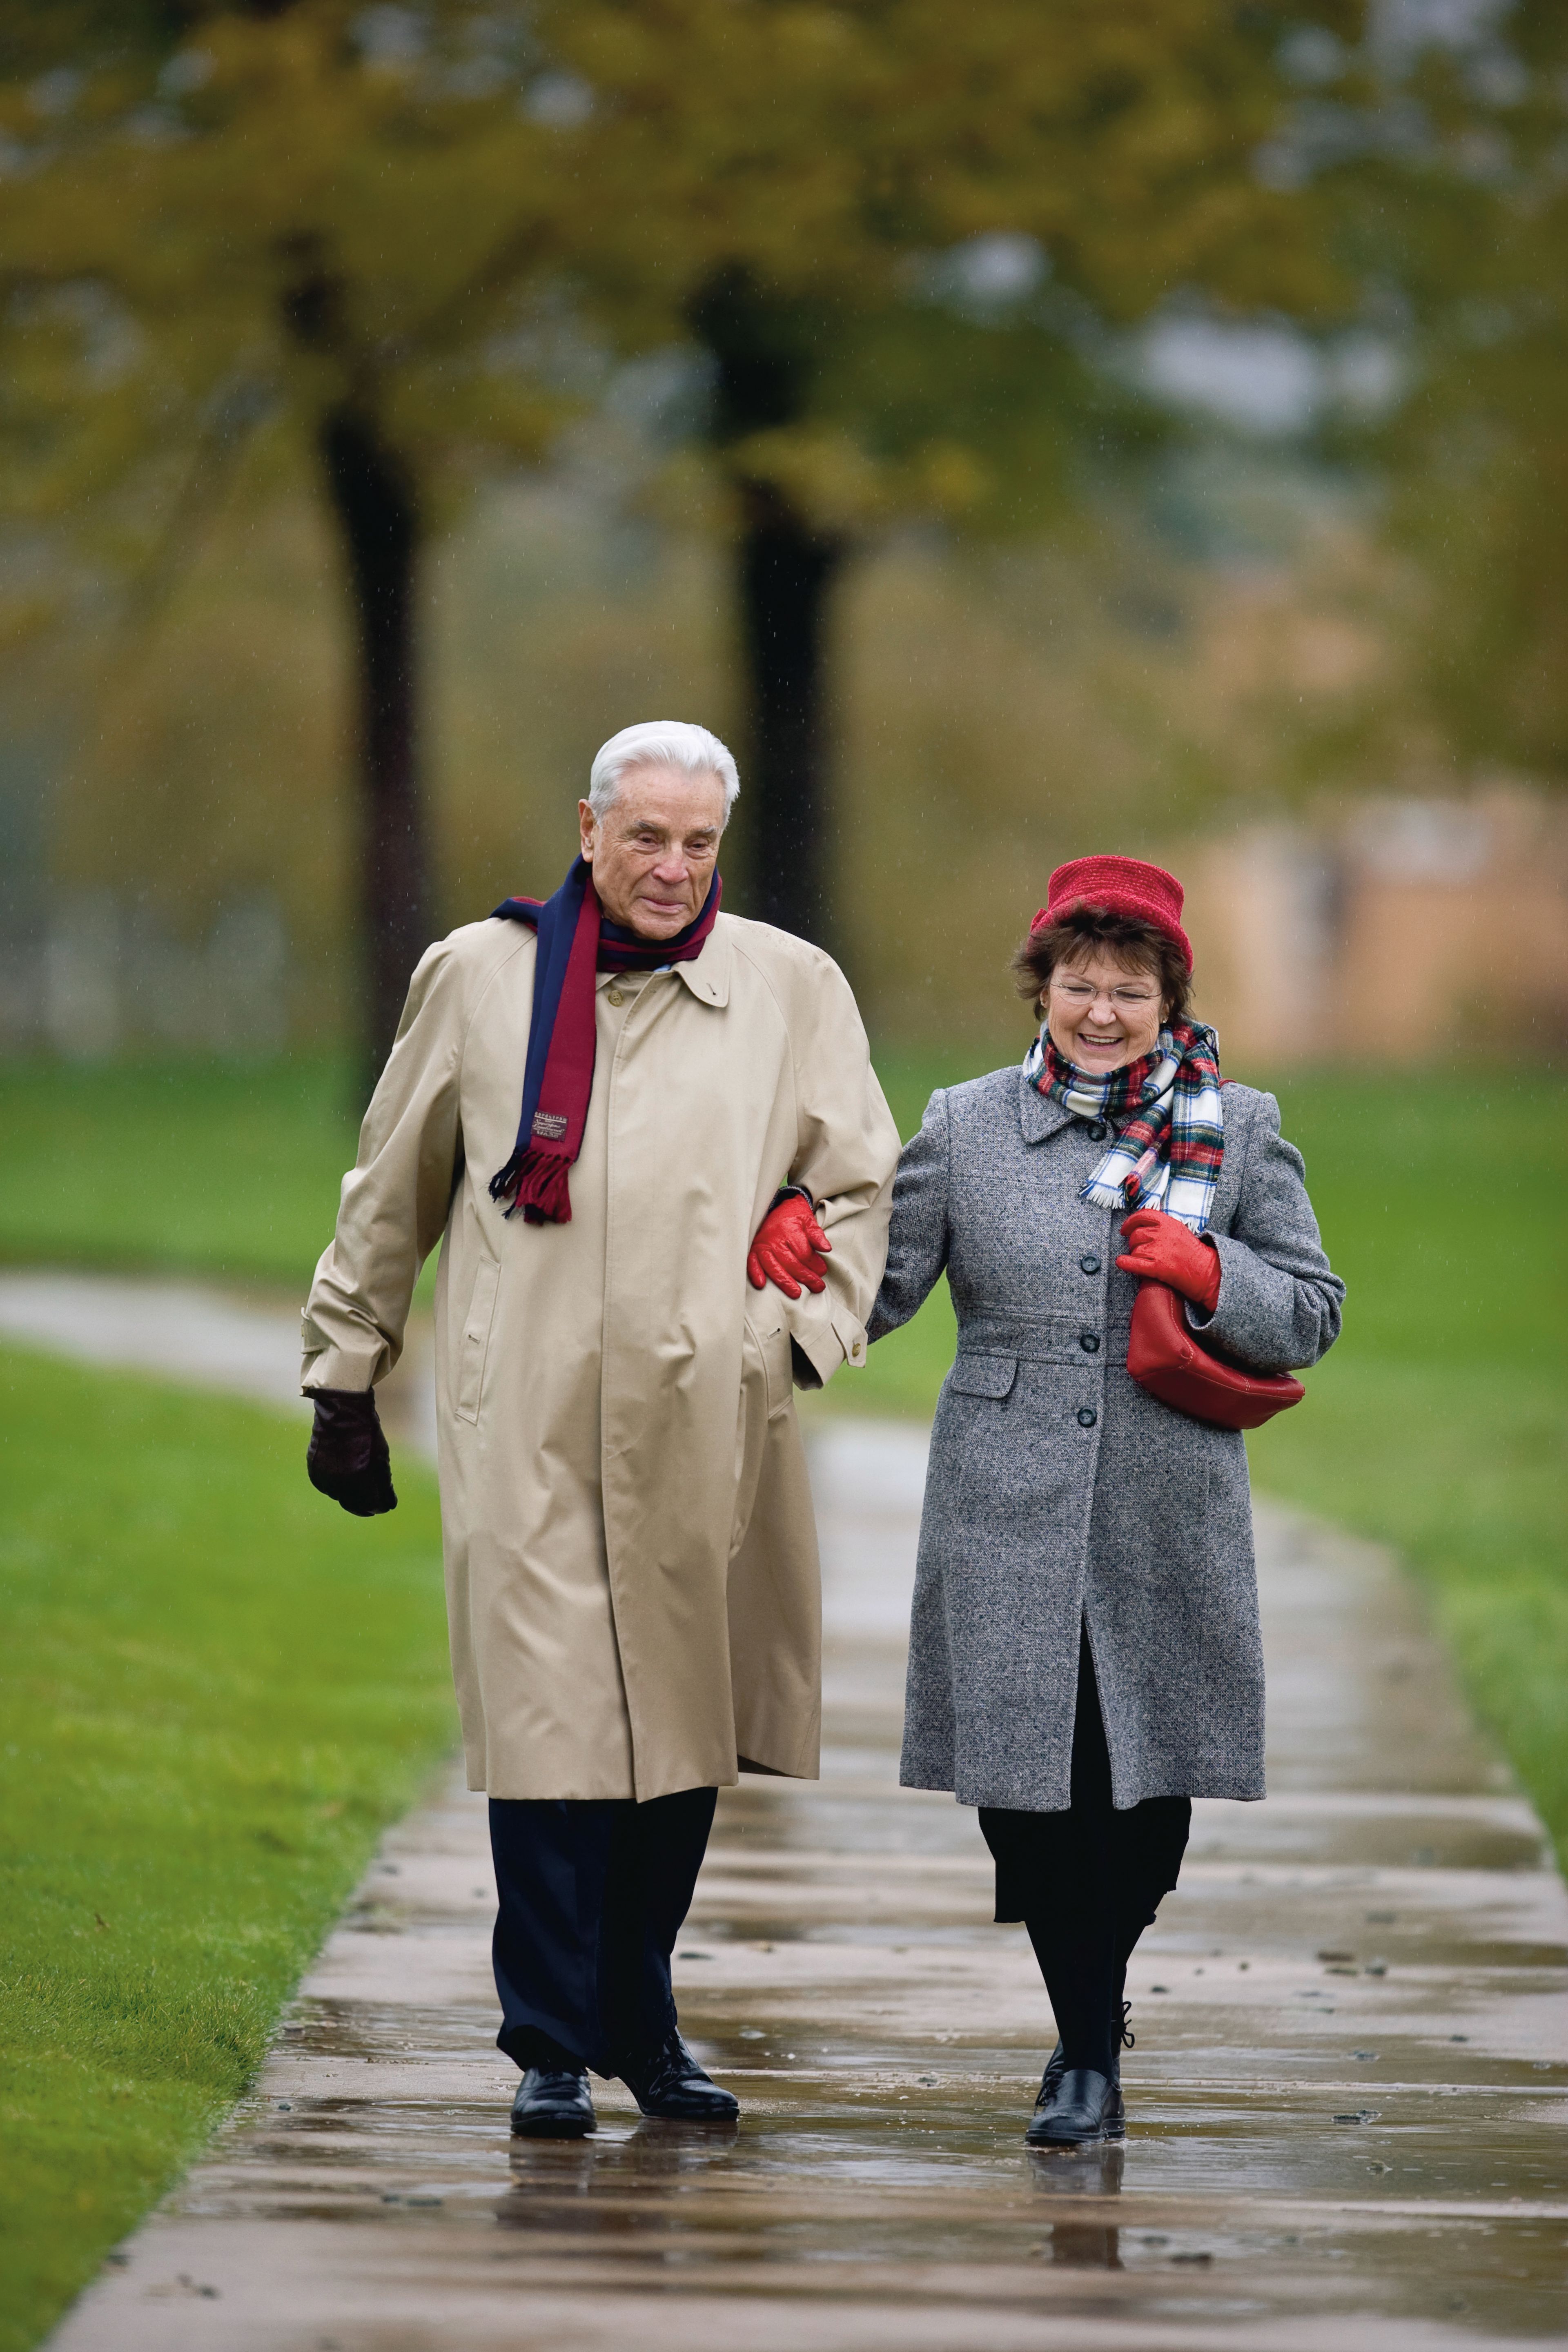 An elderly couple walking while dressed in winter clothing.